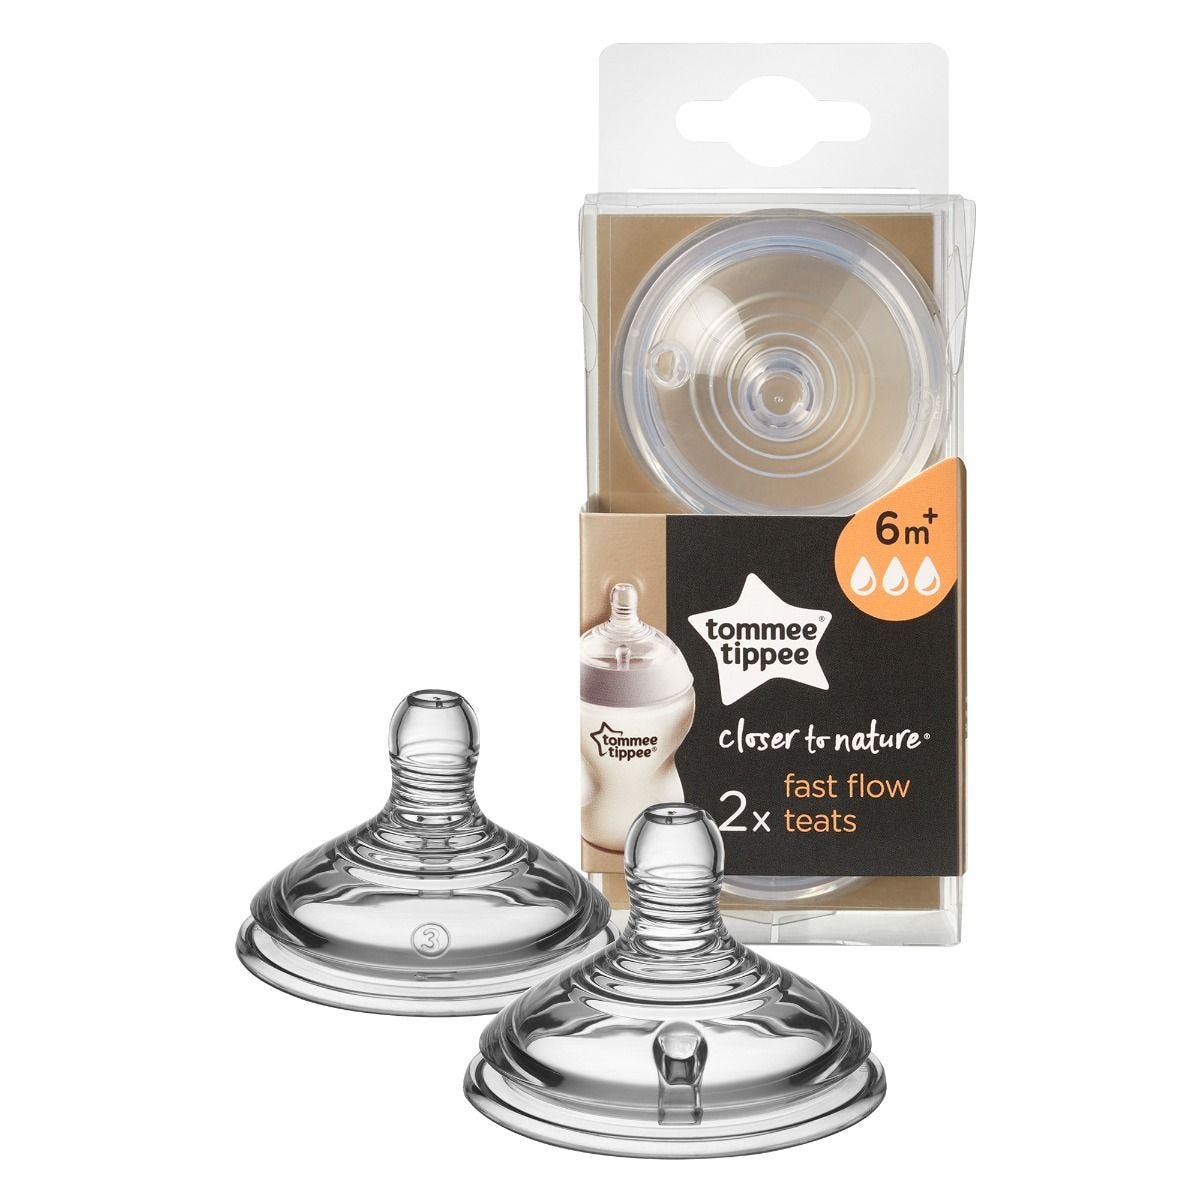 Tommee Tippee - Closer To Nature Fast Flow Teats (6m+) Teats  x2